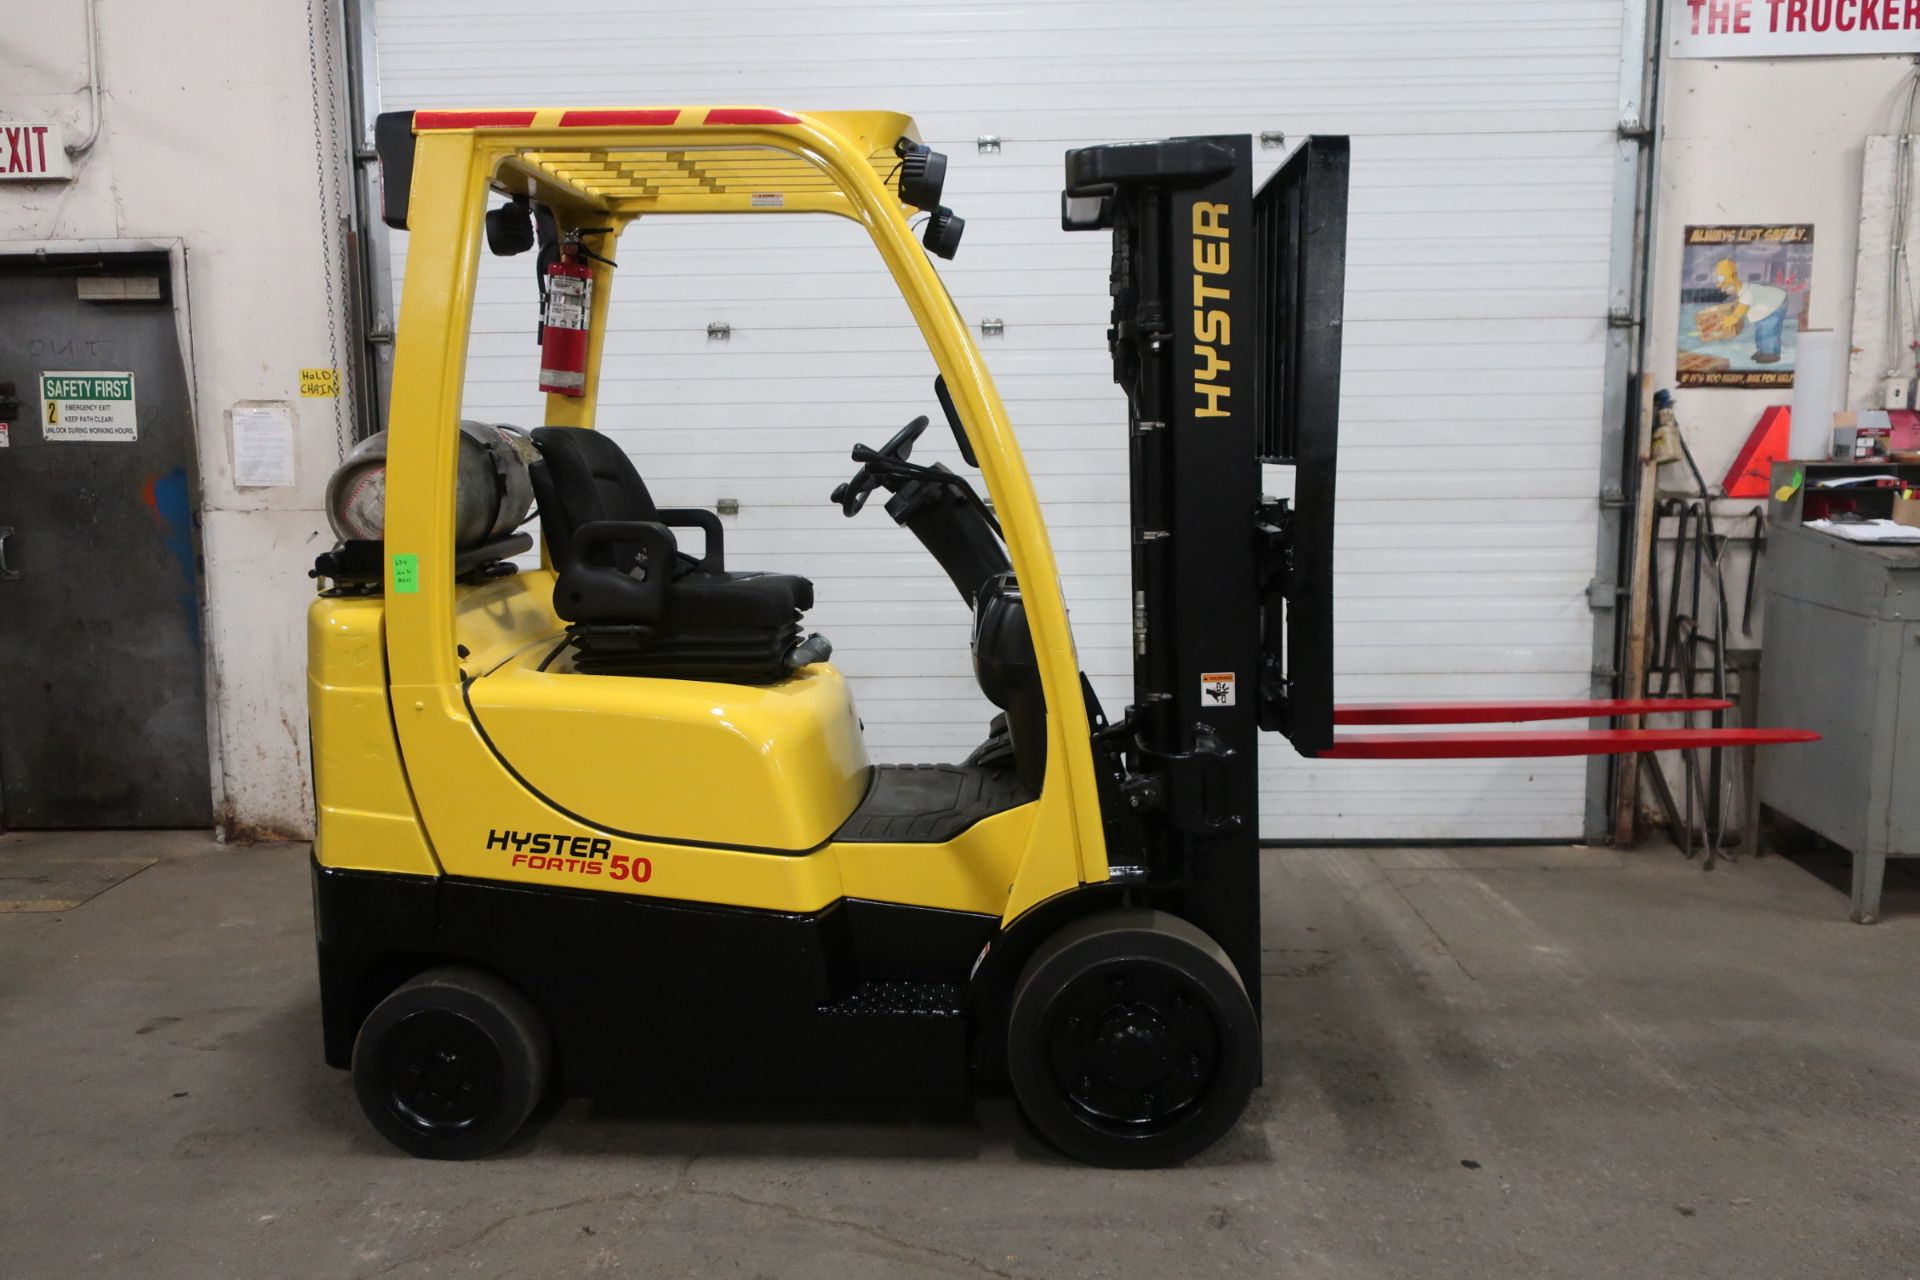 FREE CUSTOMS - 2012 Hyster 5000lbs Capacity Forklift with 3-stage mast - LPG (propane) with